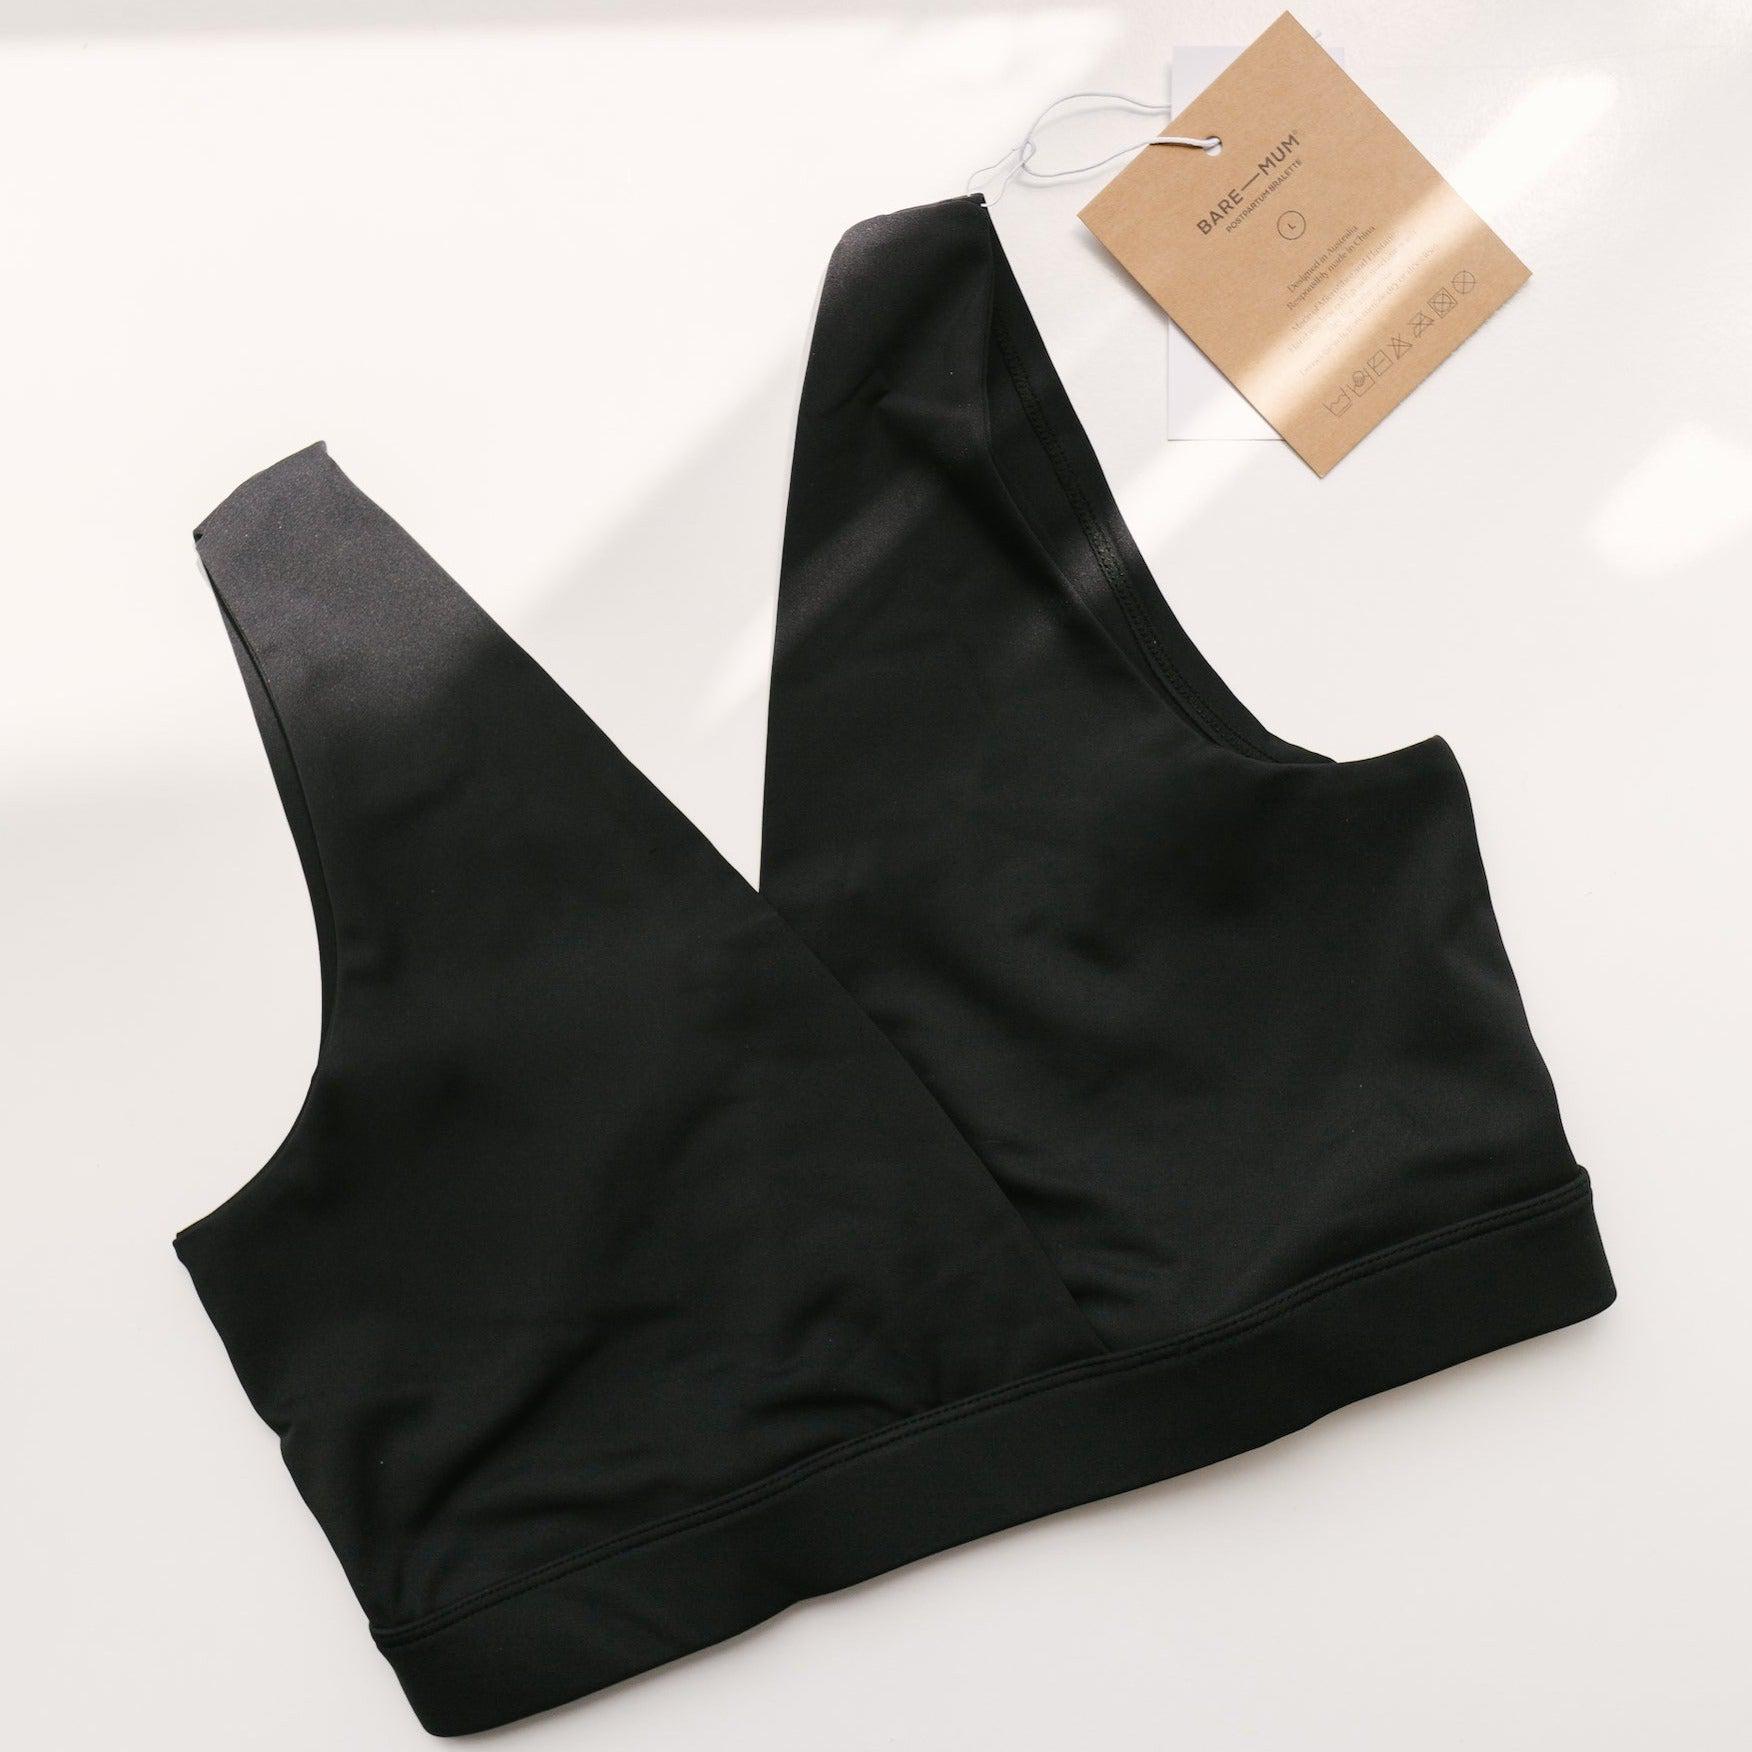 A black Postpartum bra from Bare Mum, perfect for breastfeeding mothers in need of recovery support.